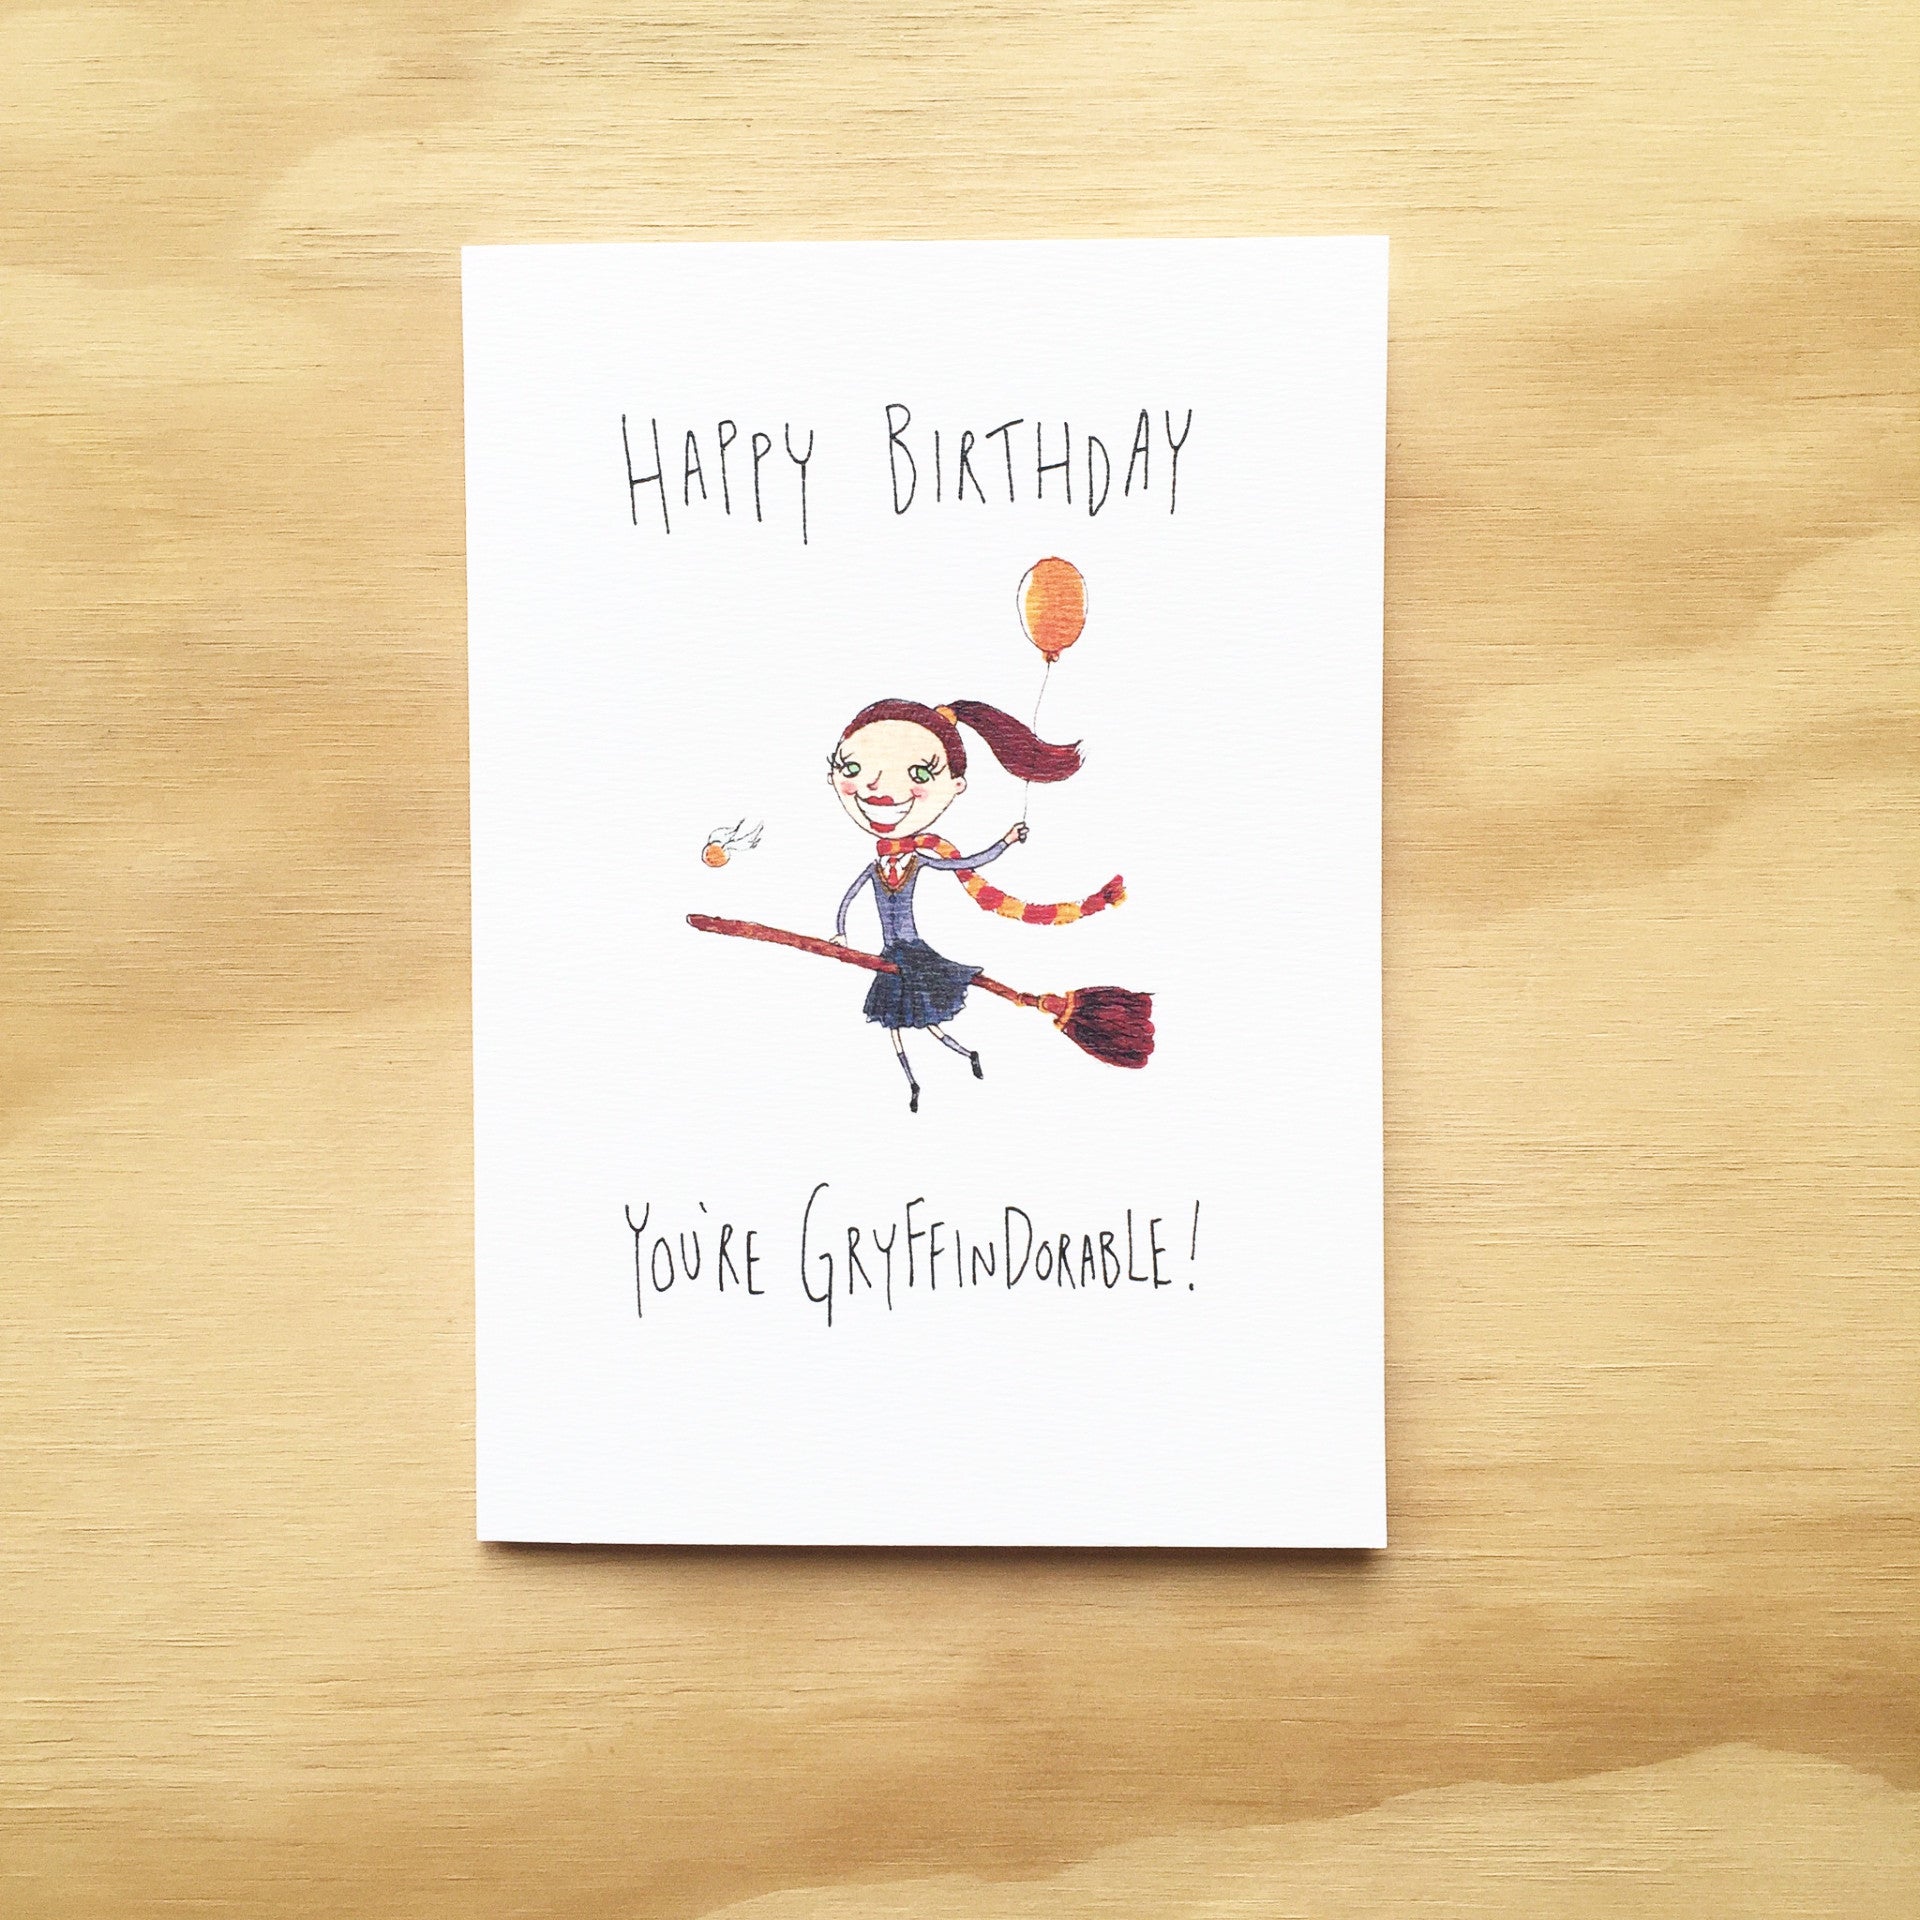 Happy Birthday, You're Gryffindorable - Well Drawn